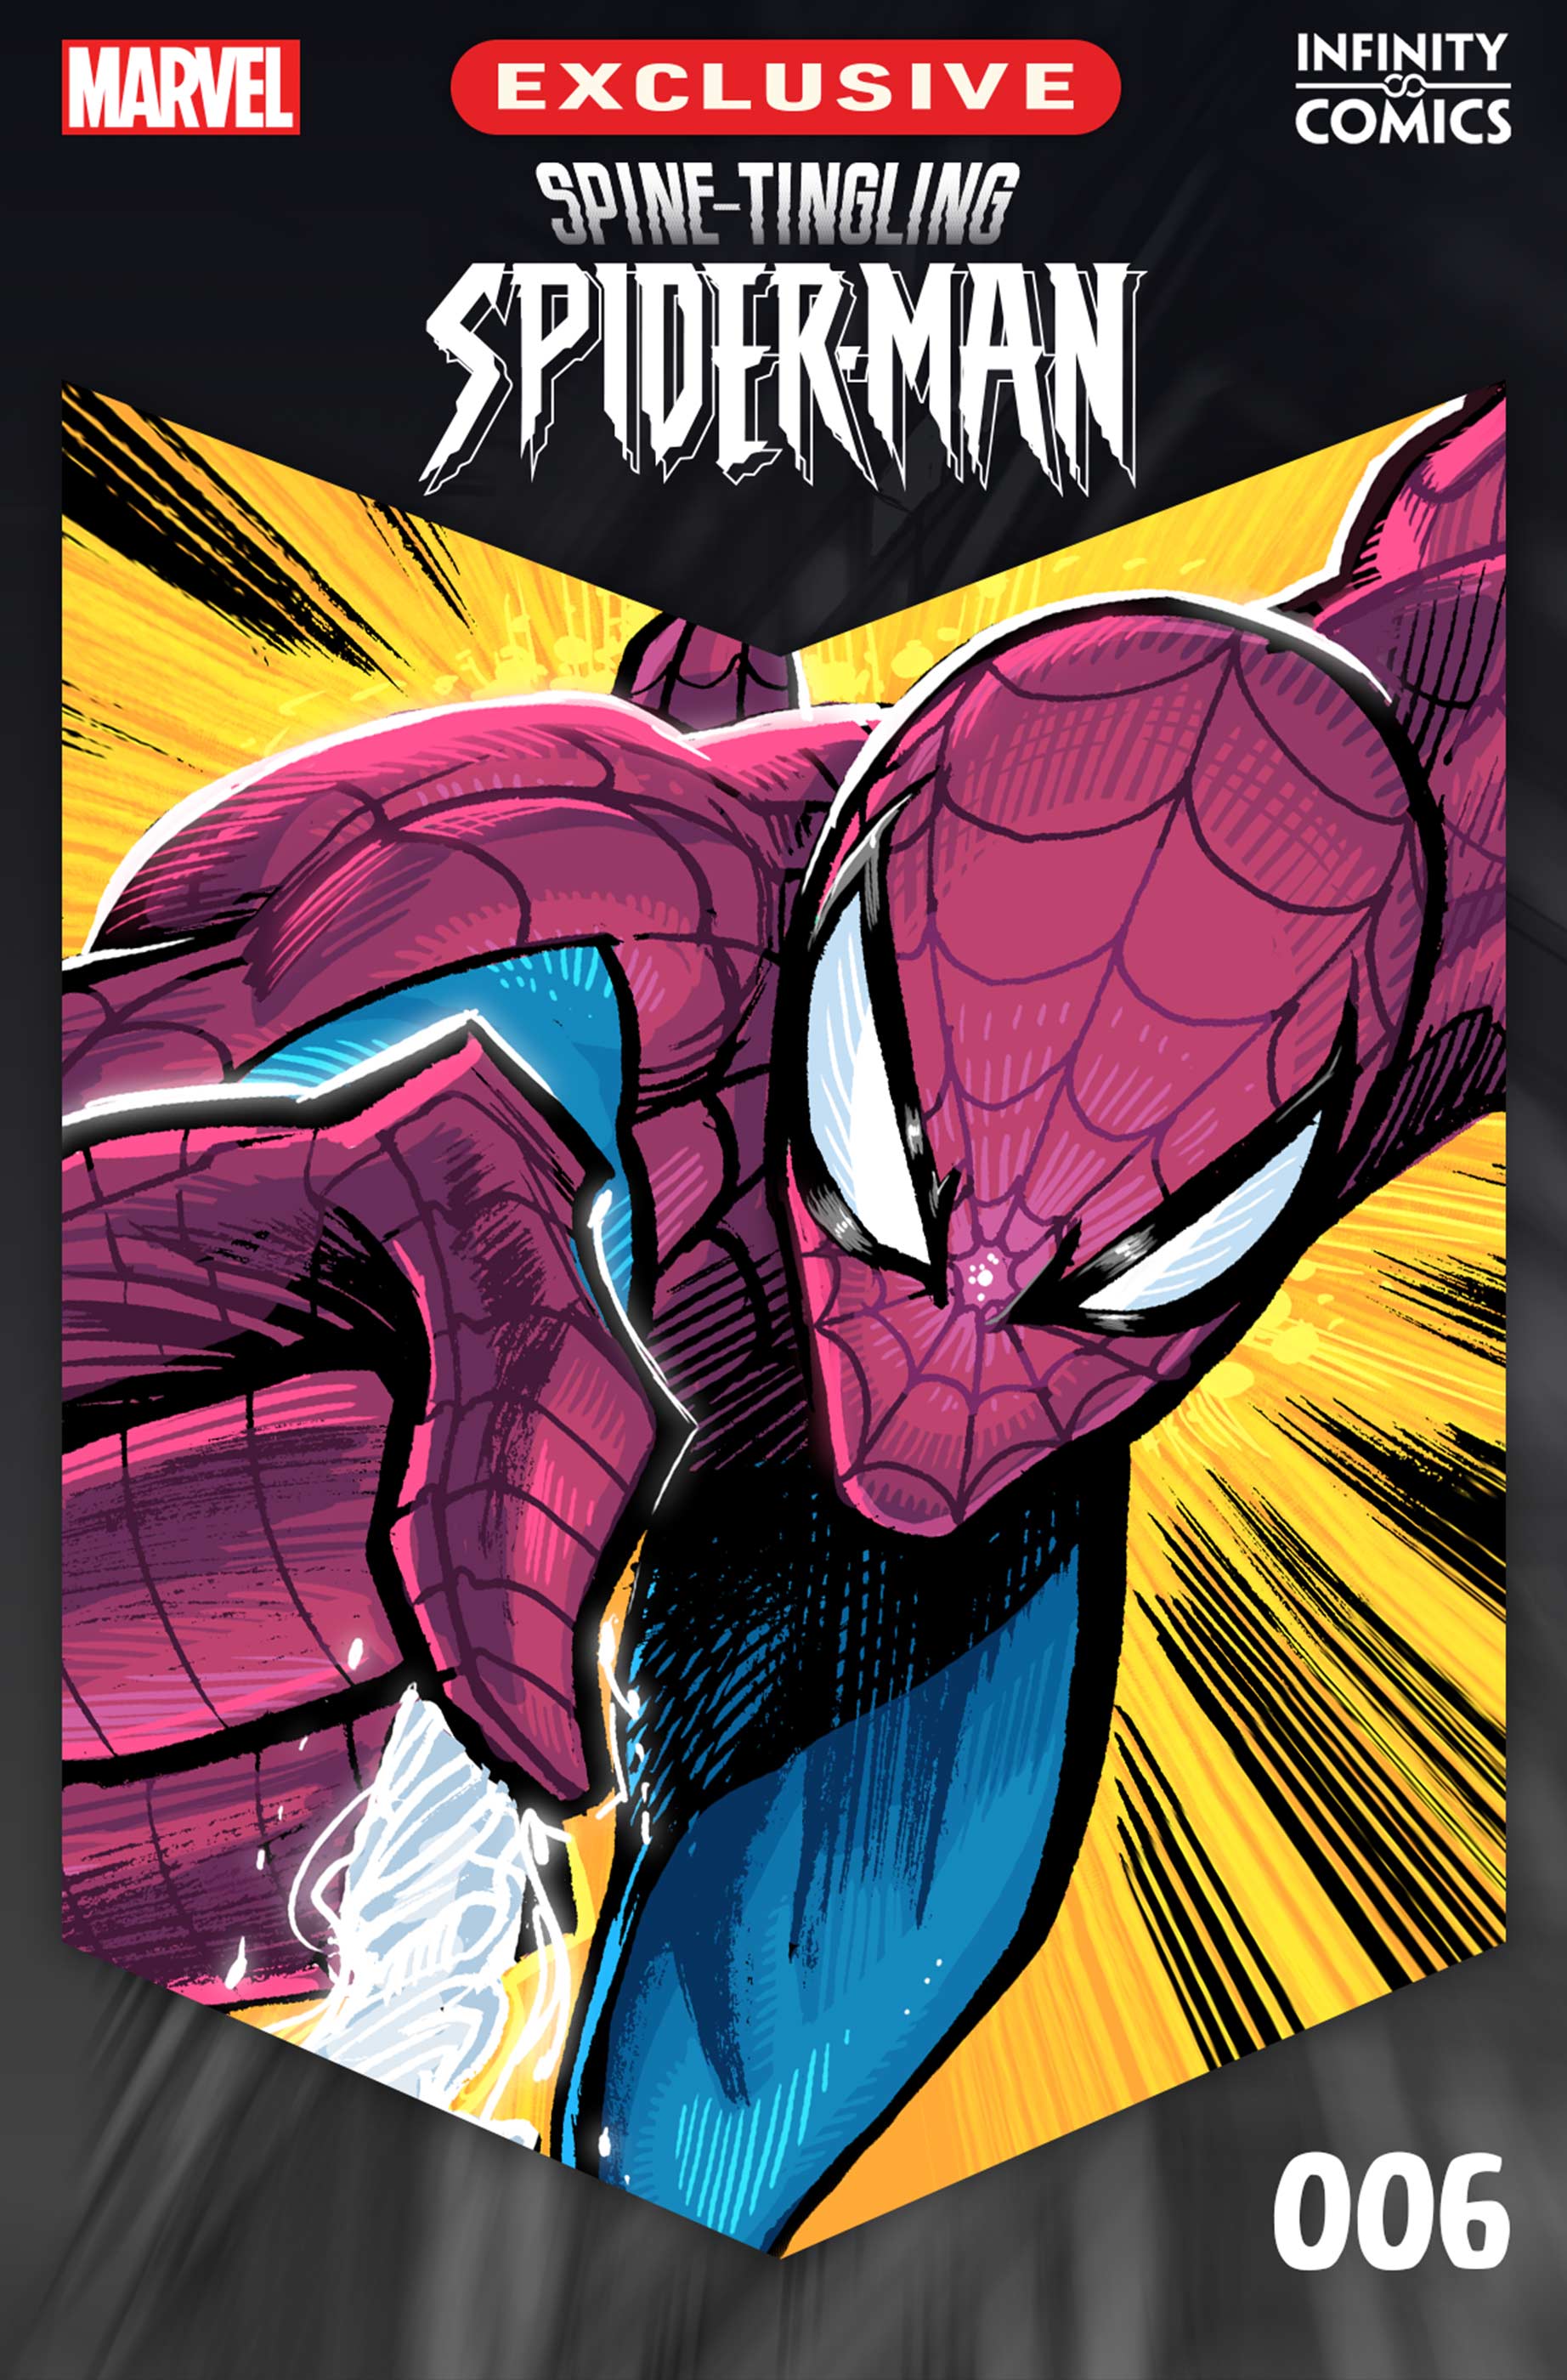 Spine-Tingling Spider-Man Infinity Comic (2021) #6